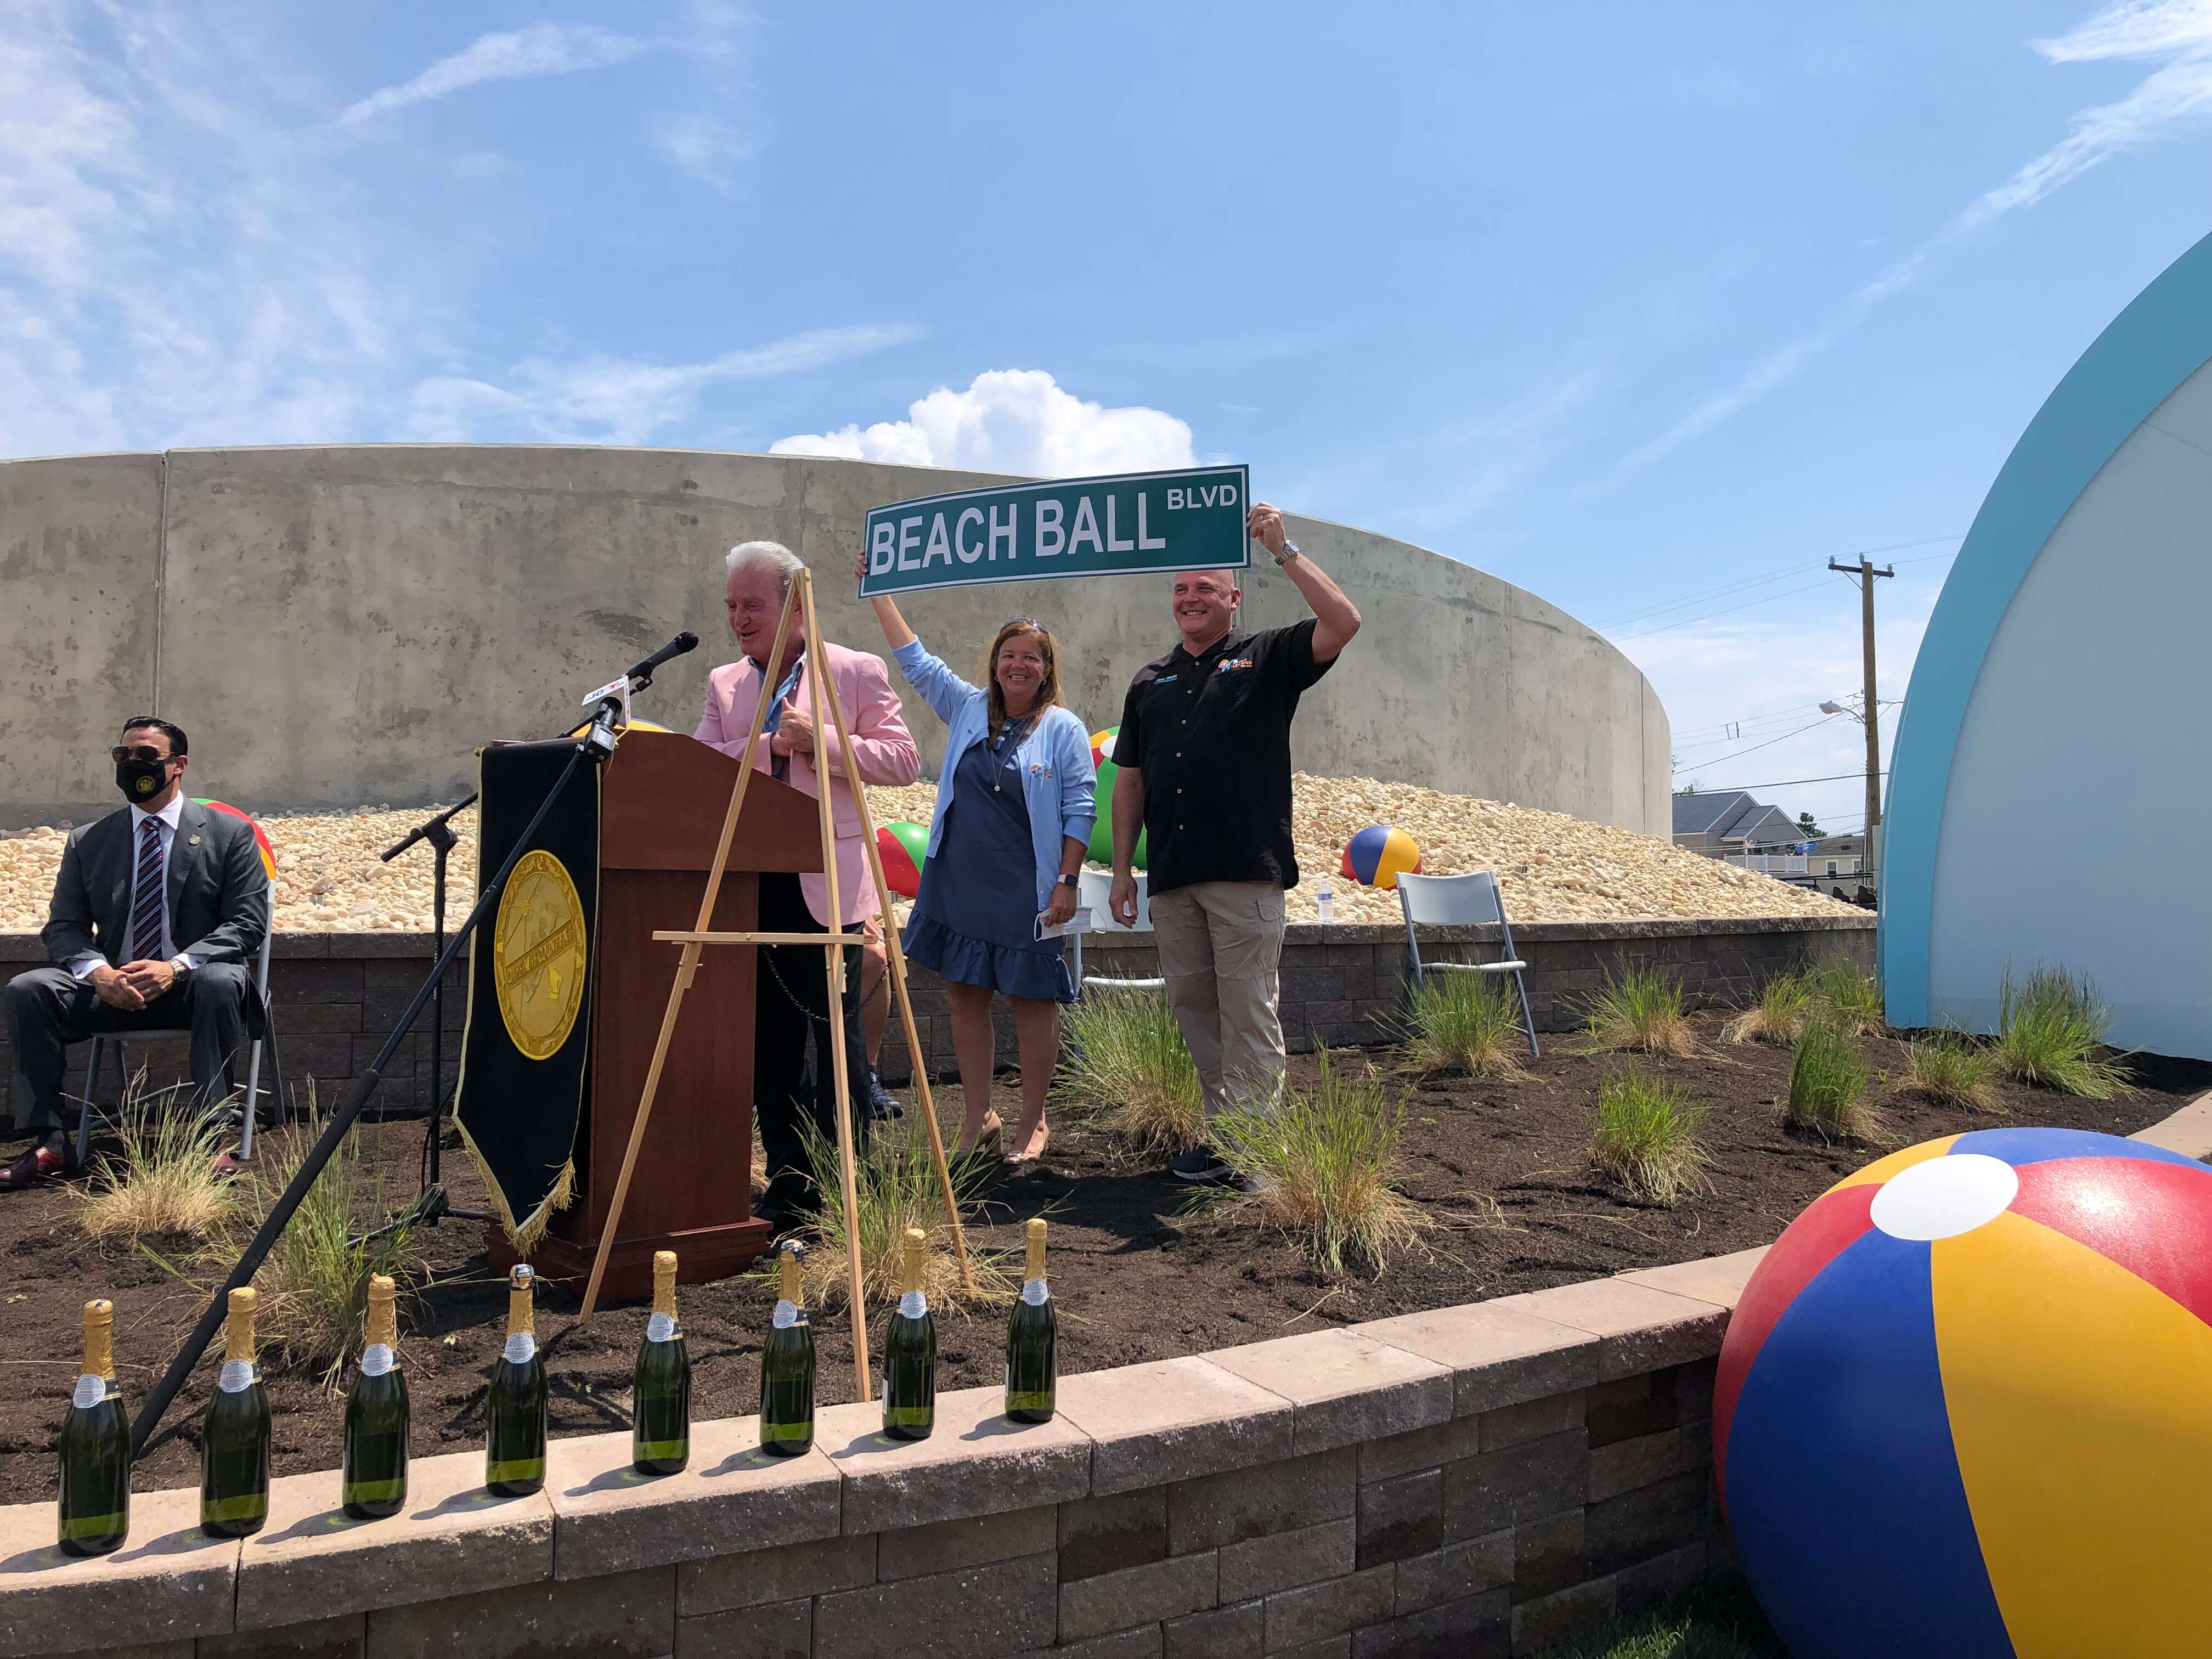 County officials introduced residents and visitors to "Beach Ball Boulevard" July 1. The renovations are apart of an ongoing construction project on Route 47